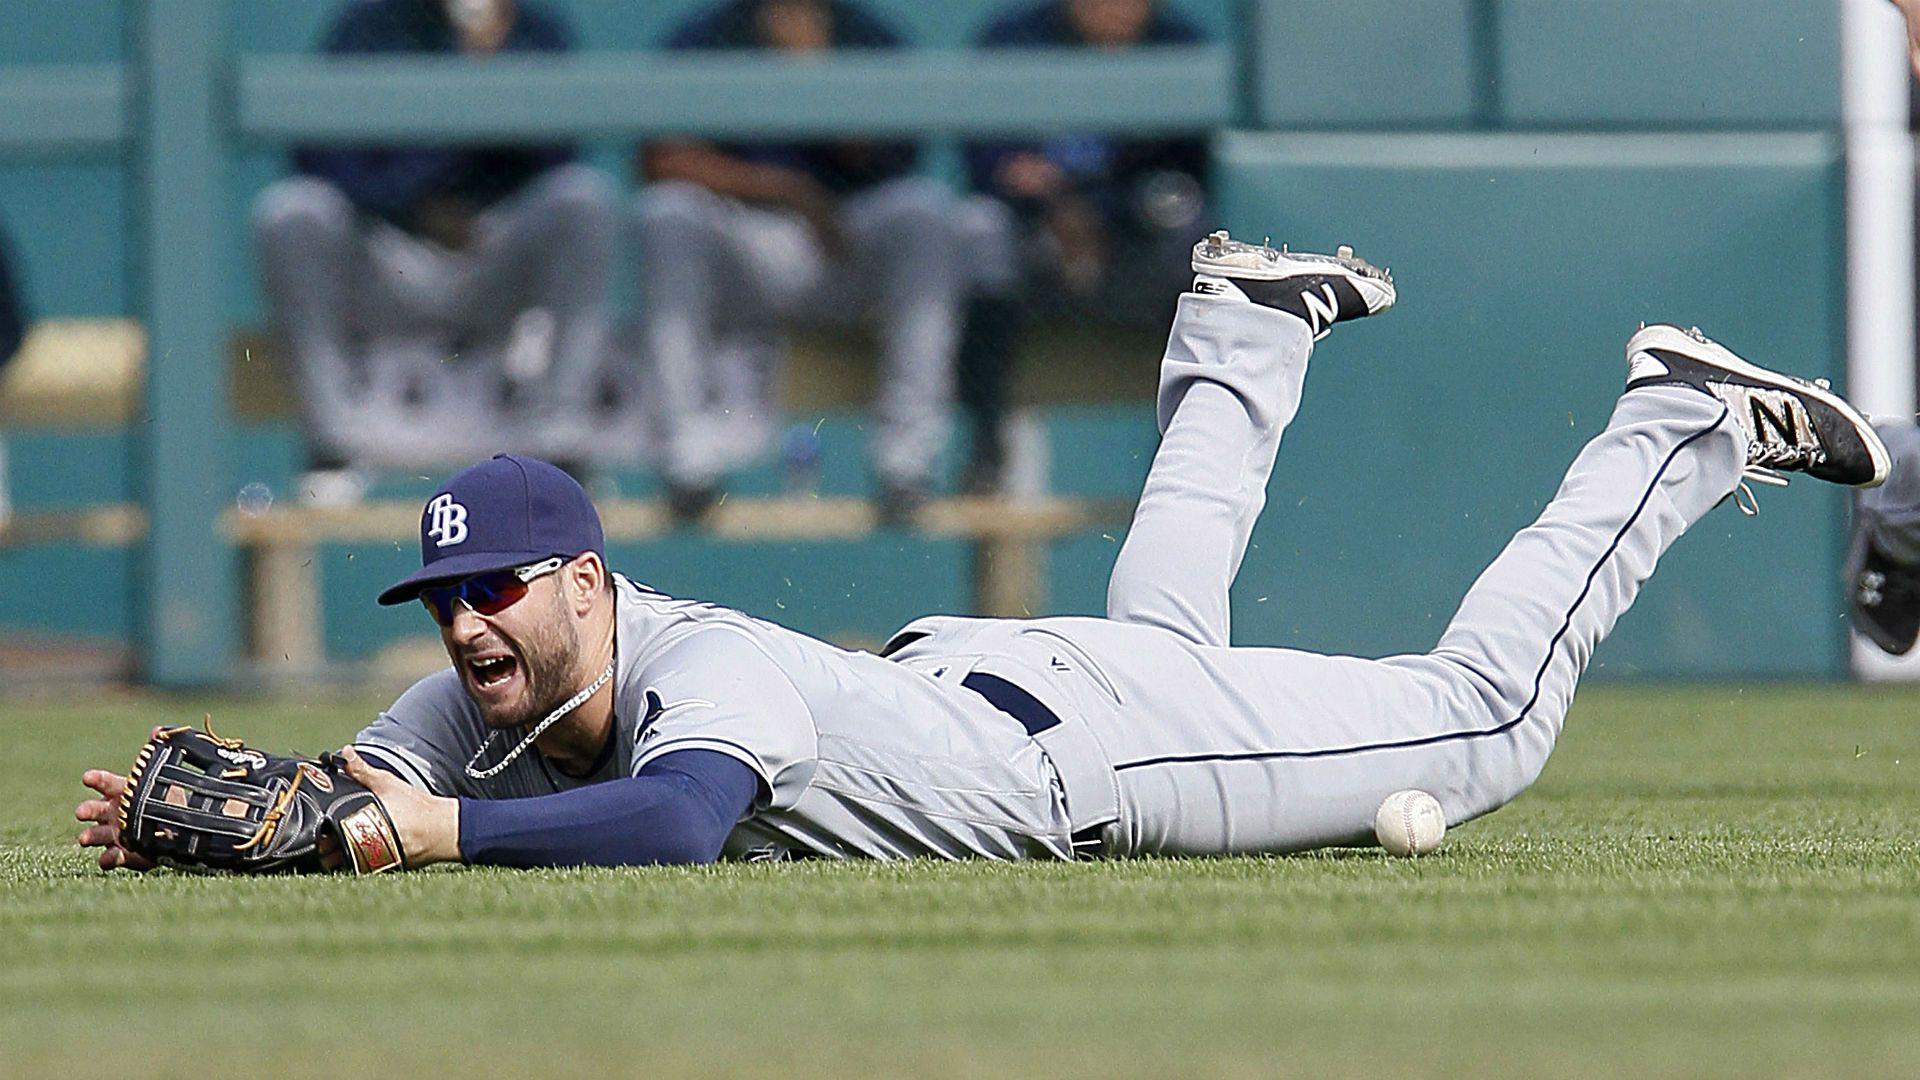 Rays' Kevin Kiermaier breaks hand attempting diving catch. MLB